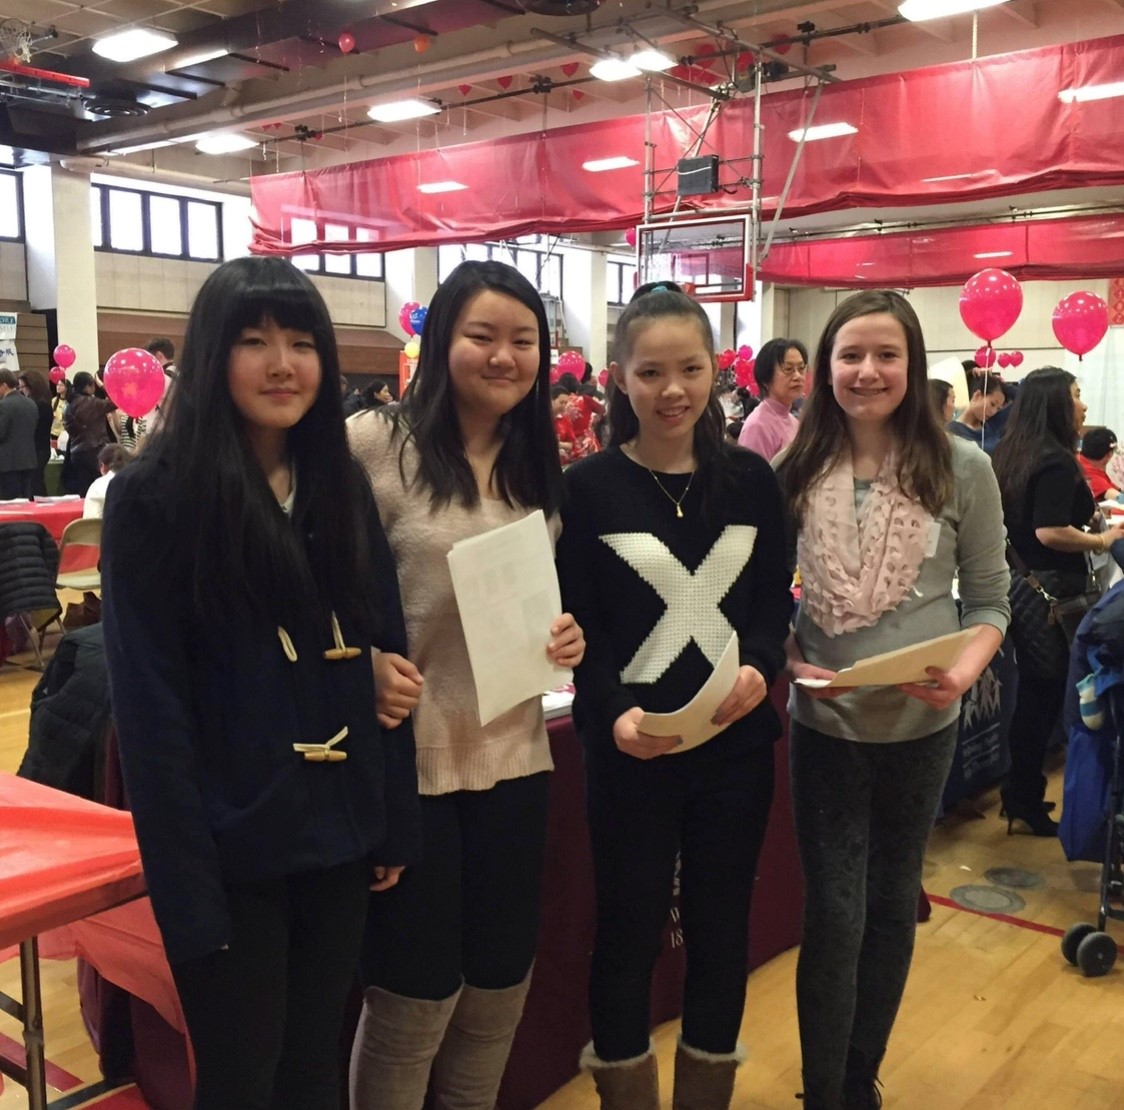 Woodward students including international students at a school event